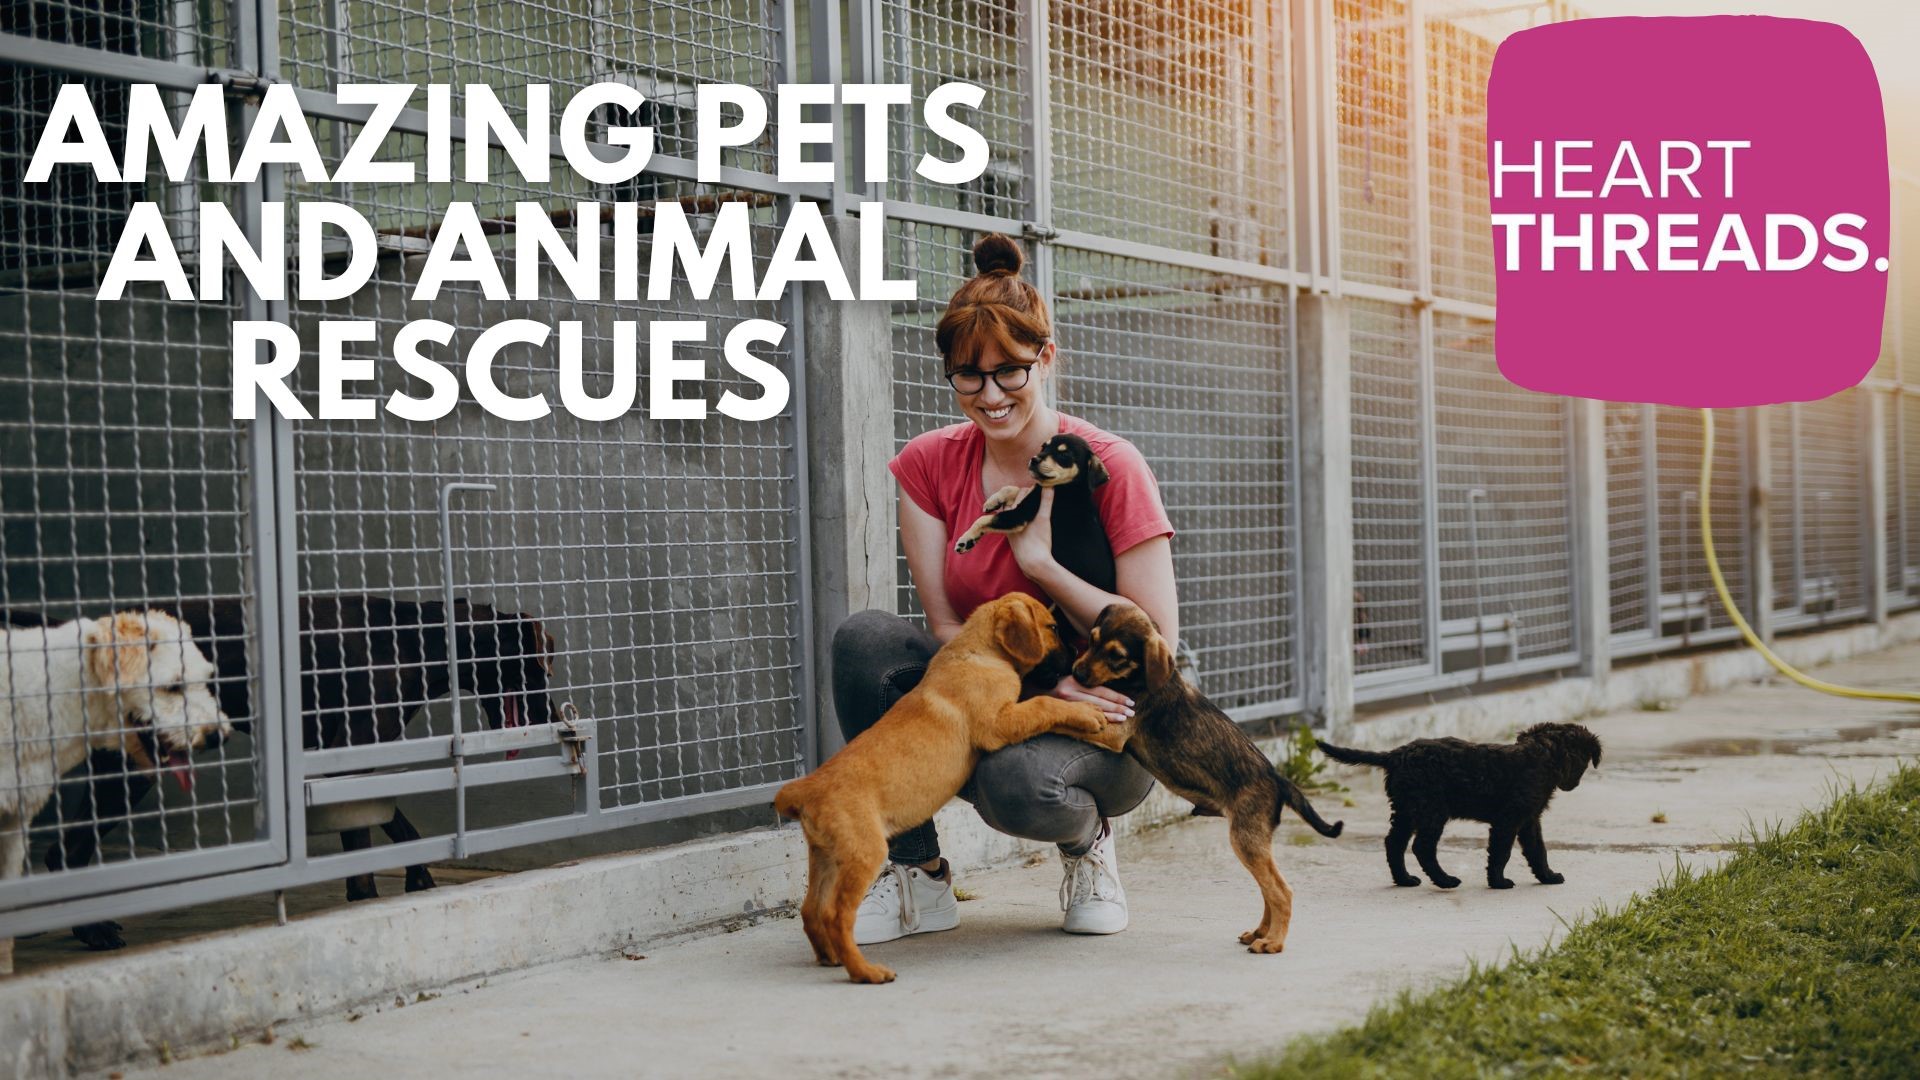 Heartwarming stories of amazing pets and animal rescues.